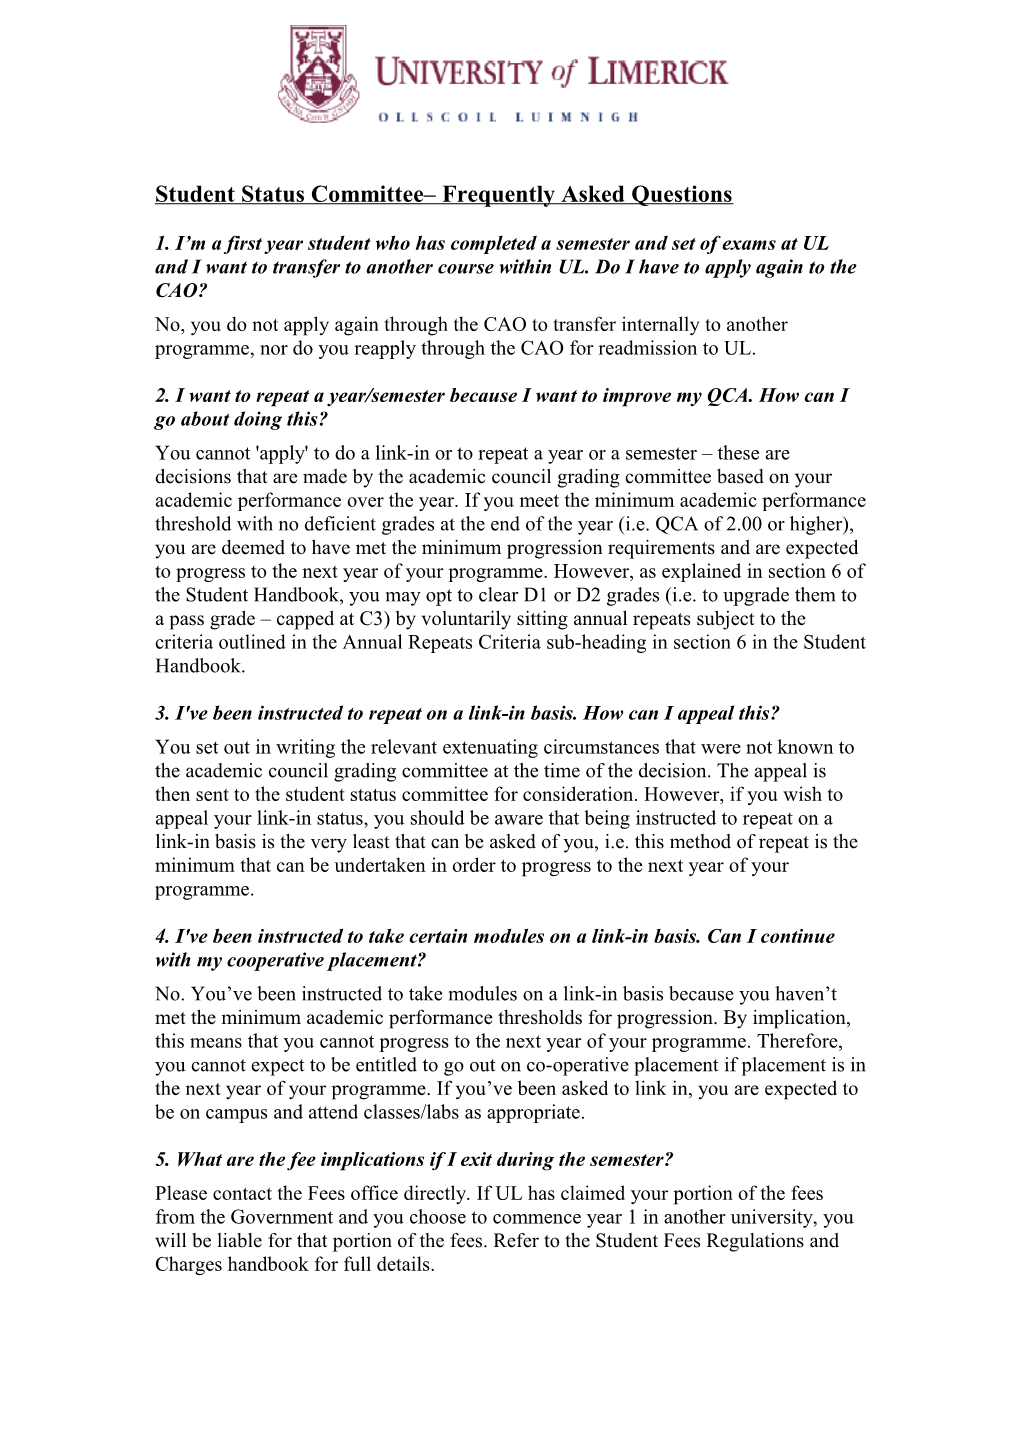 Student Status Committee Frequently Asked Questions